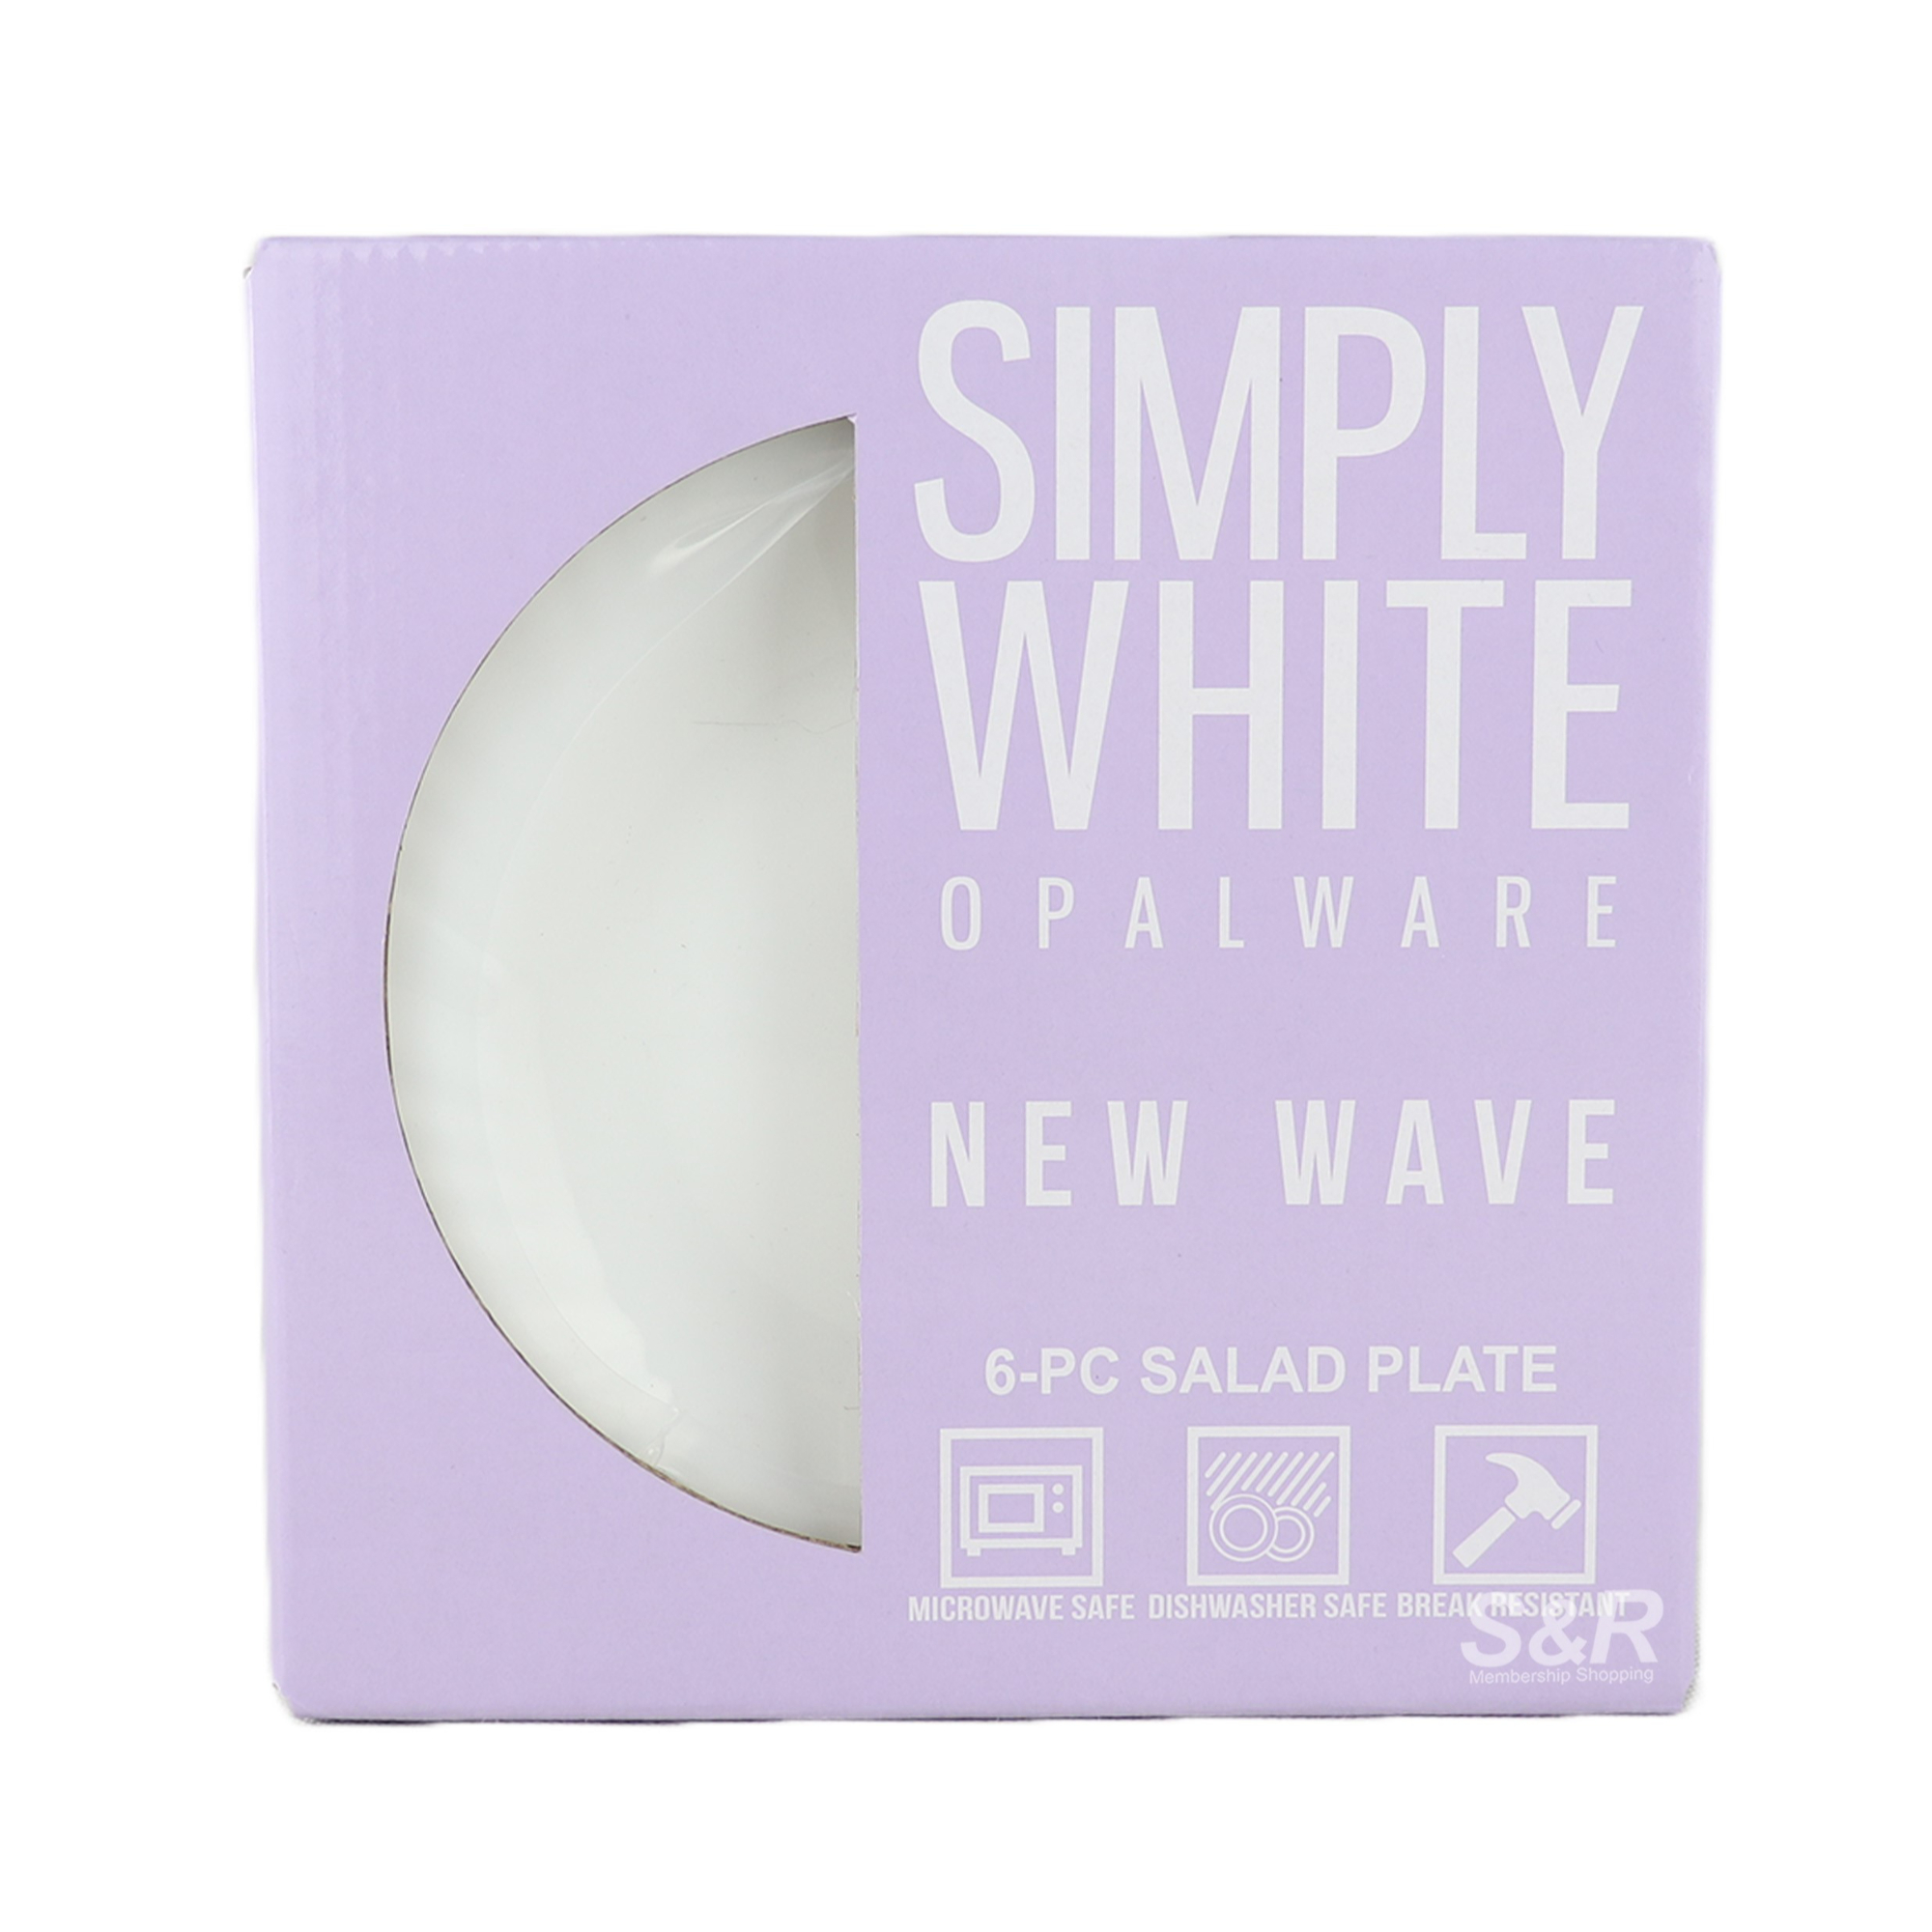 Simply White Opalware New Wave Salad Plate 6pcs